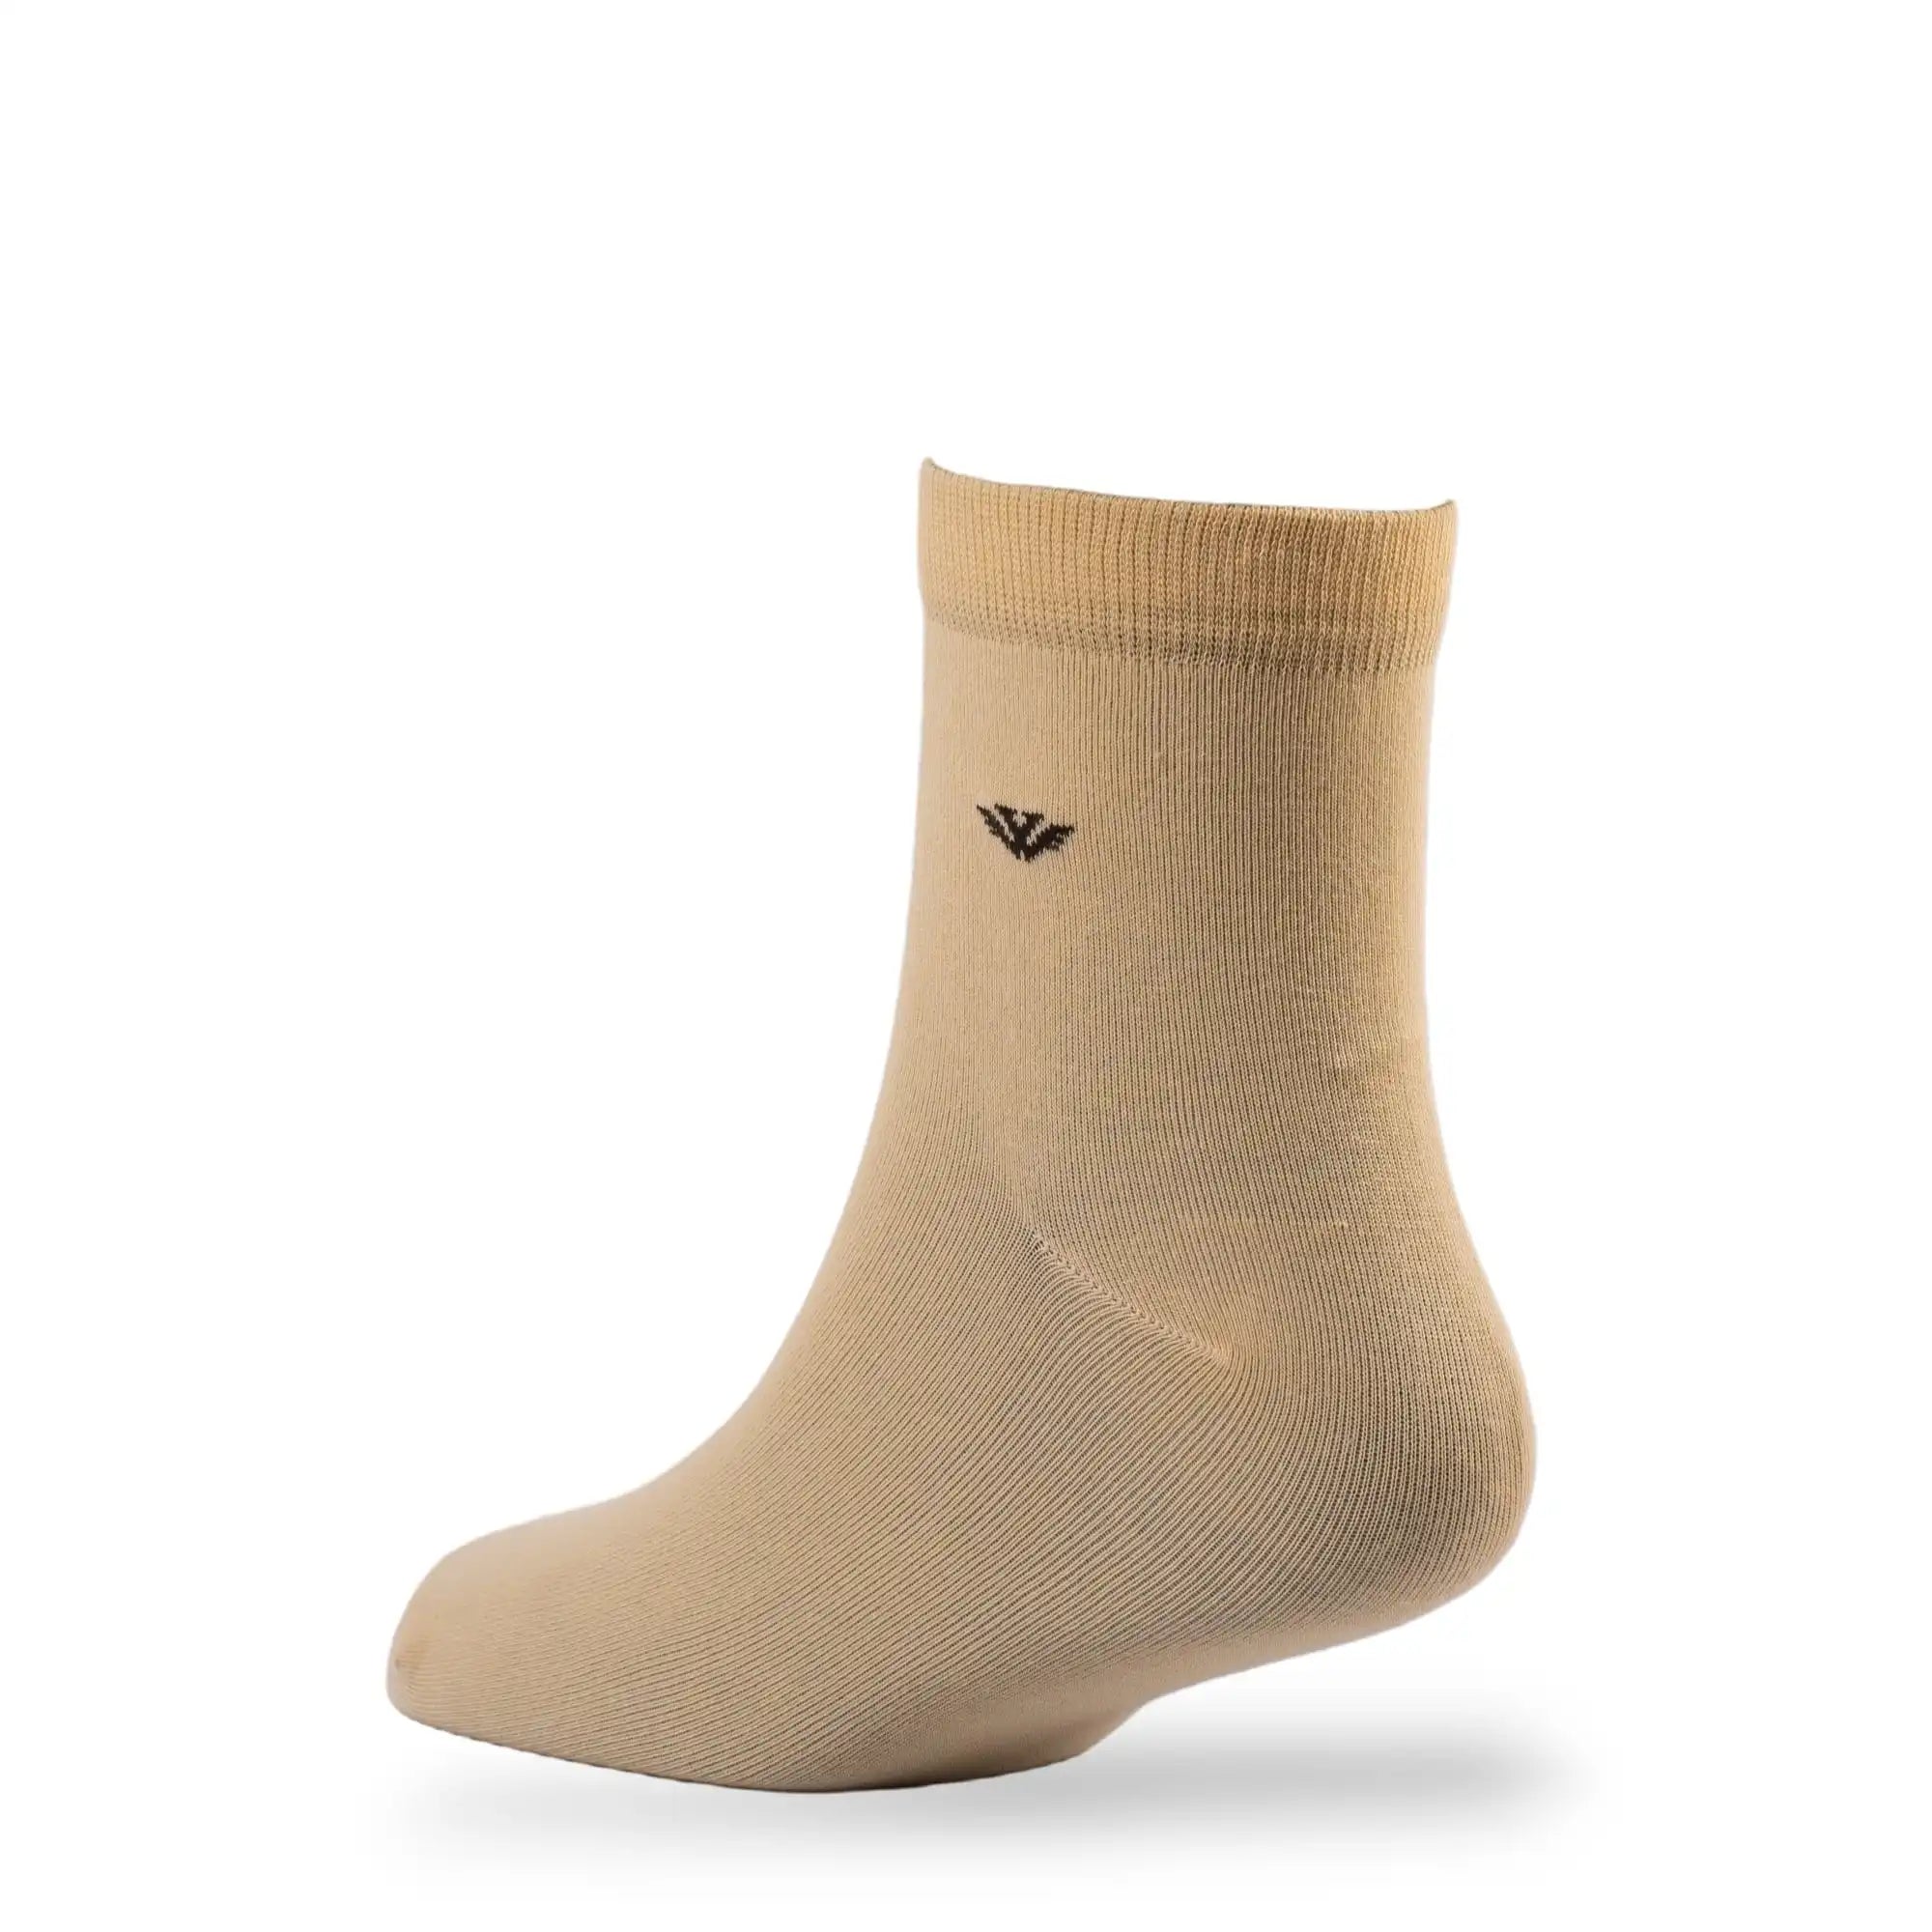 Young Wings Men's Beige Colour Cotton Fabric Solid Ankle Length Socks - Pack of 5, Style no. 2400-M1